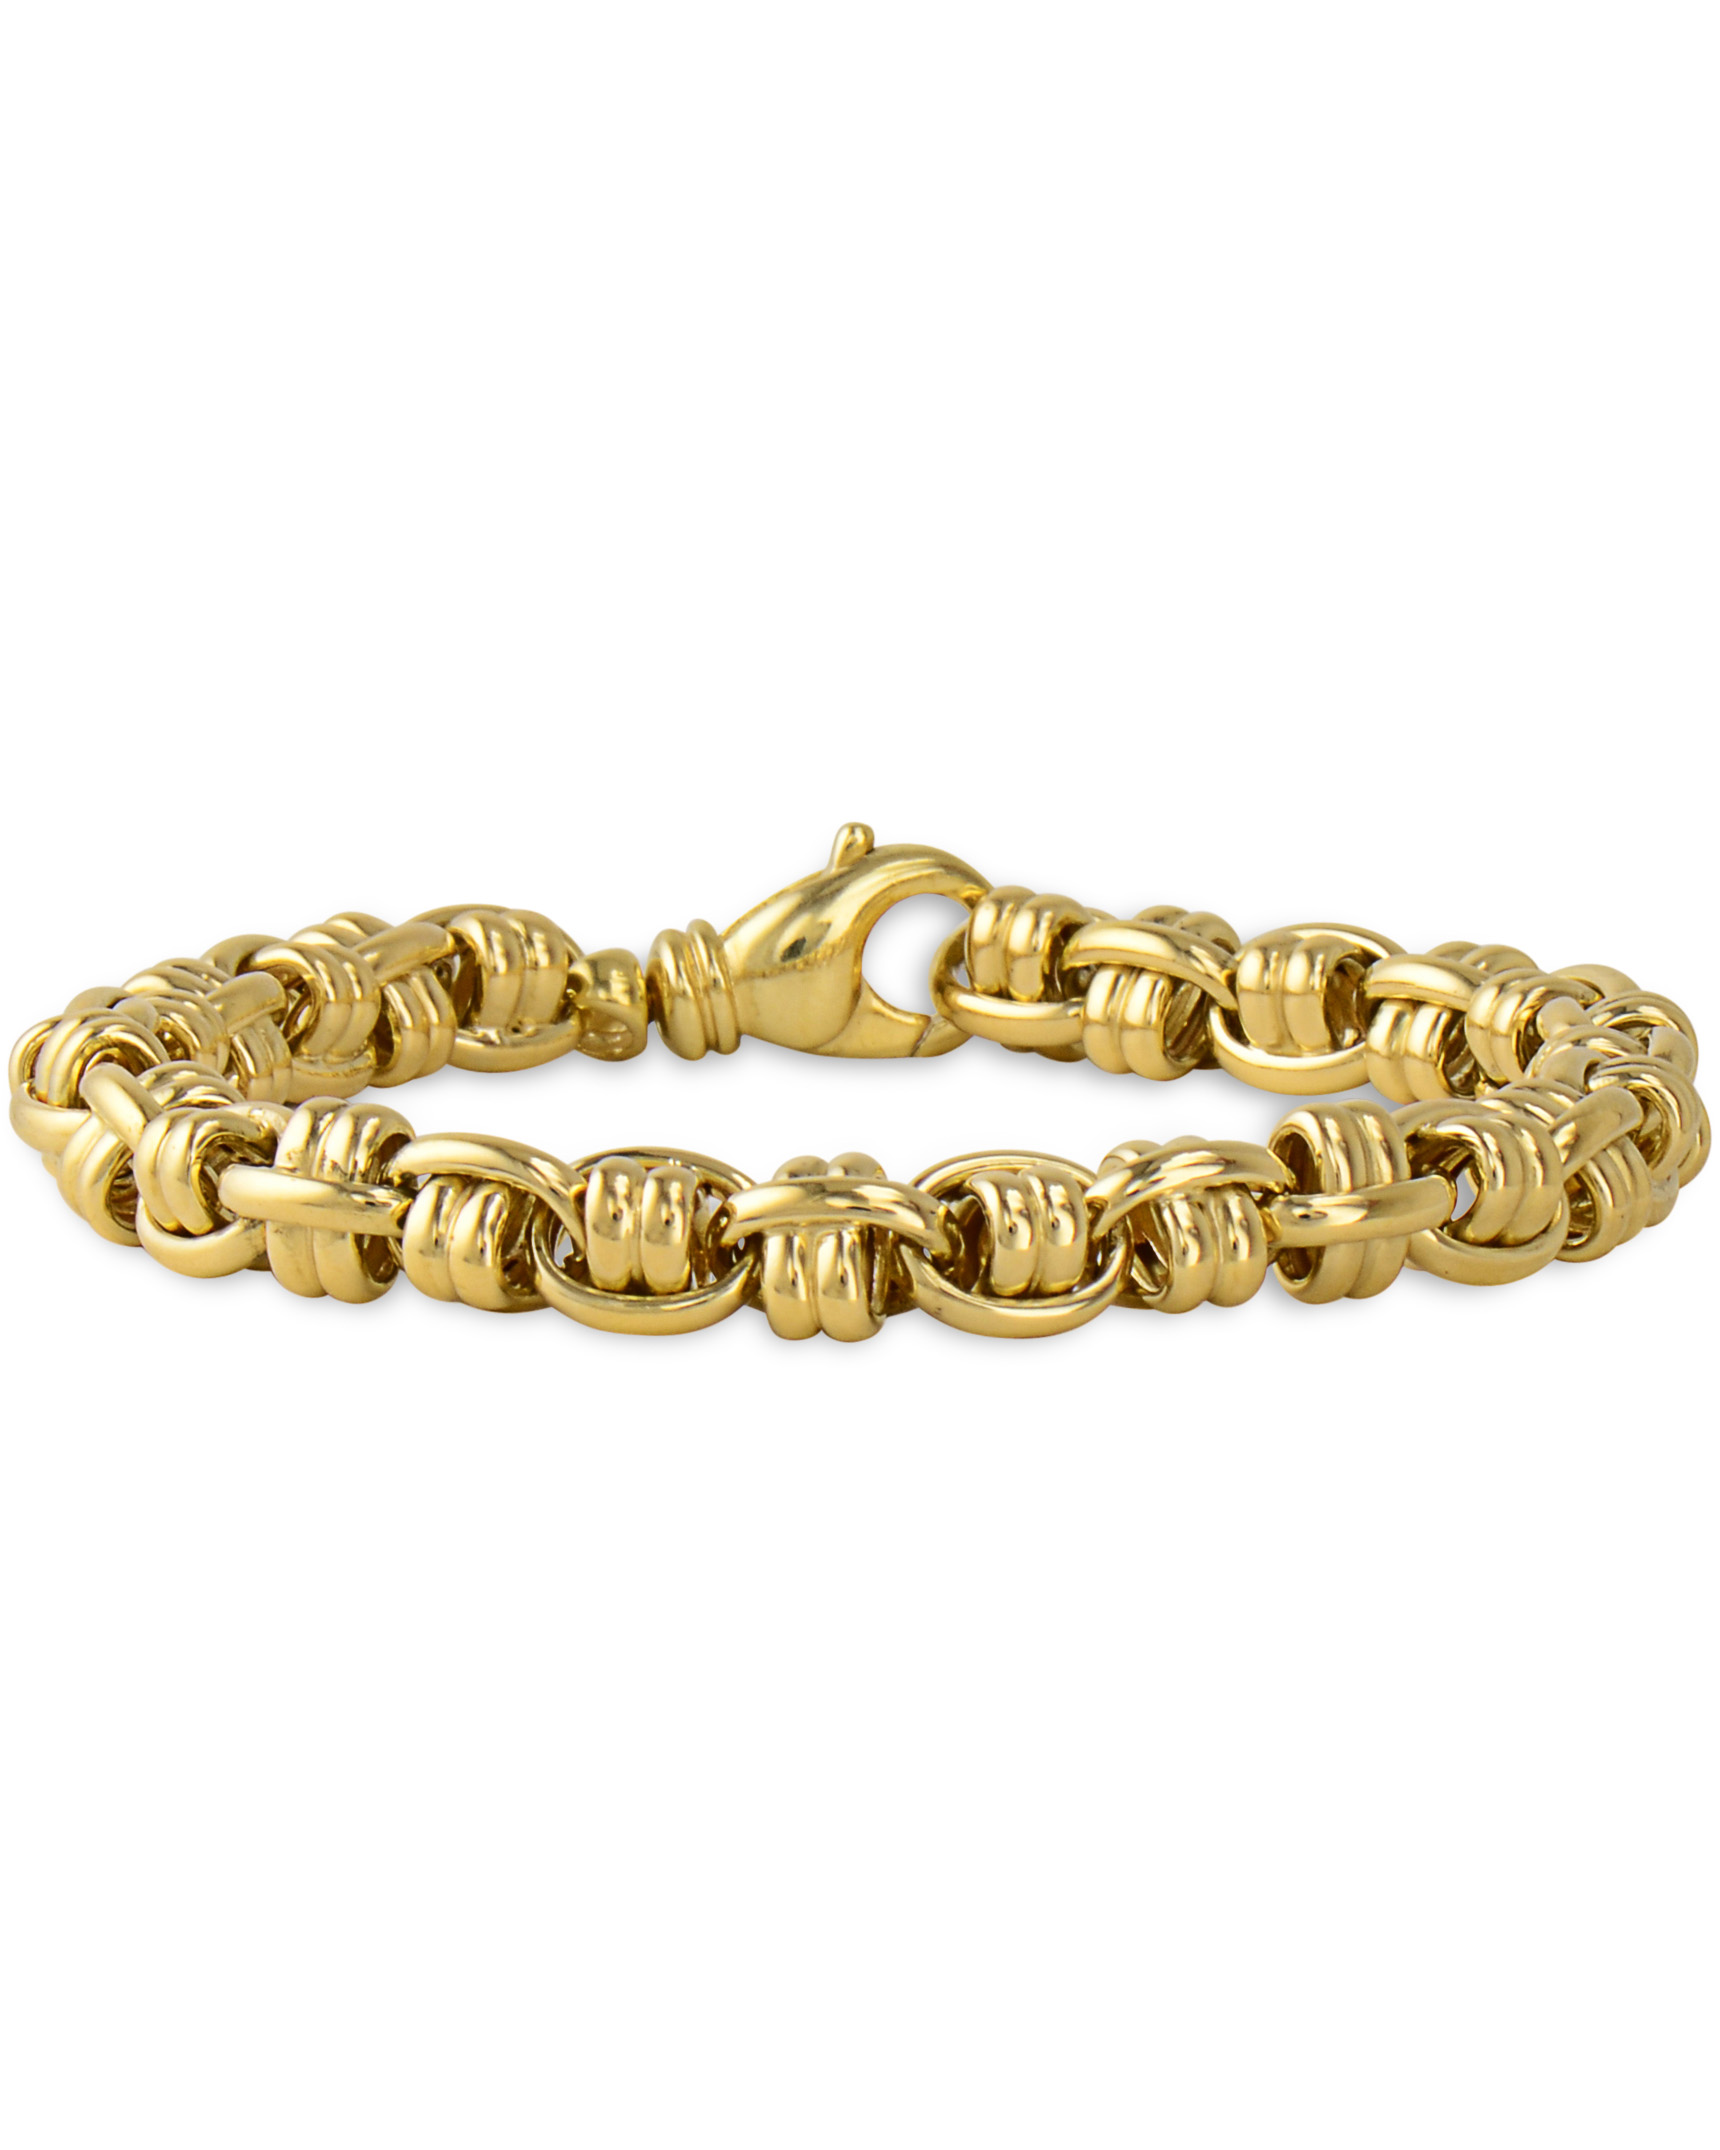 Double Band Round Leather and Yellow Gold Bracelet - Turgeon Raine